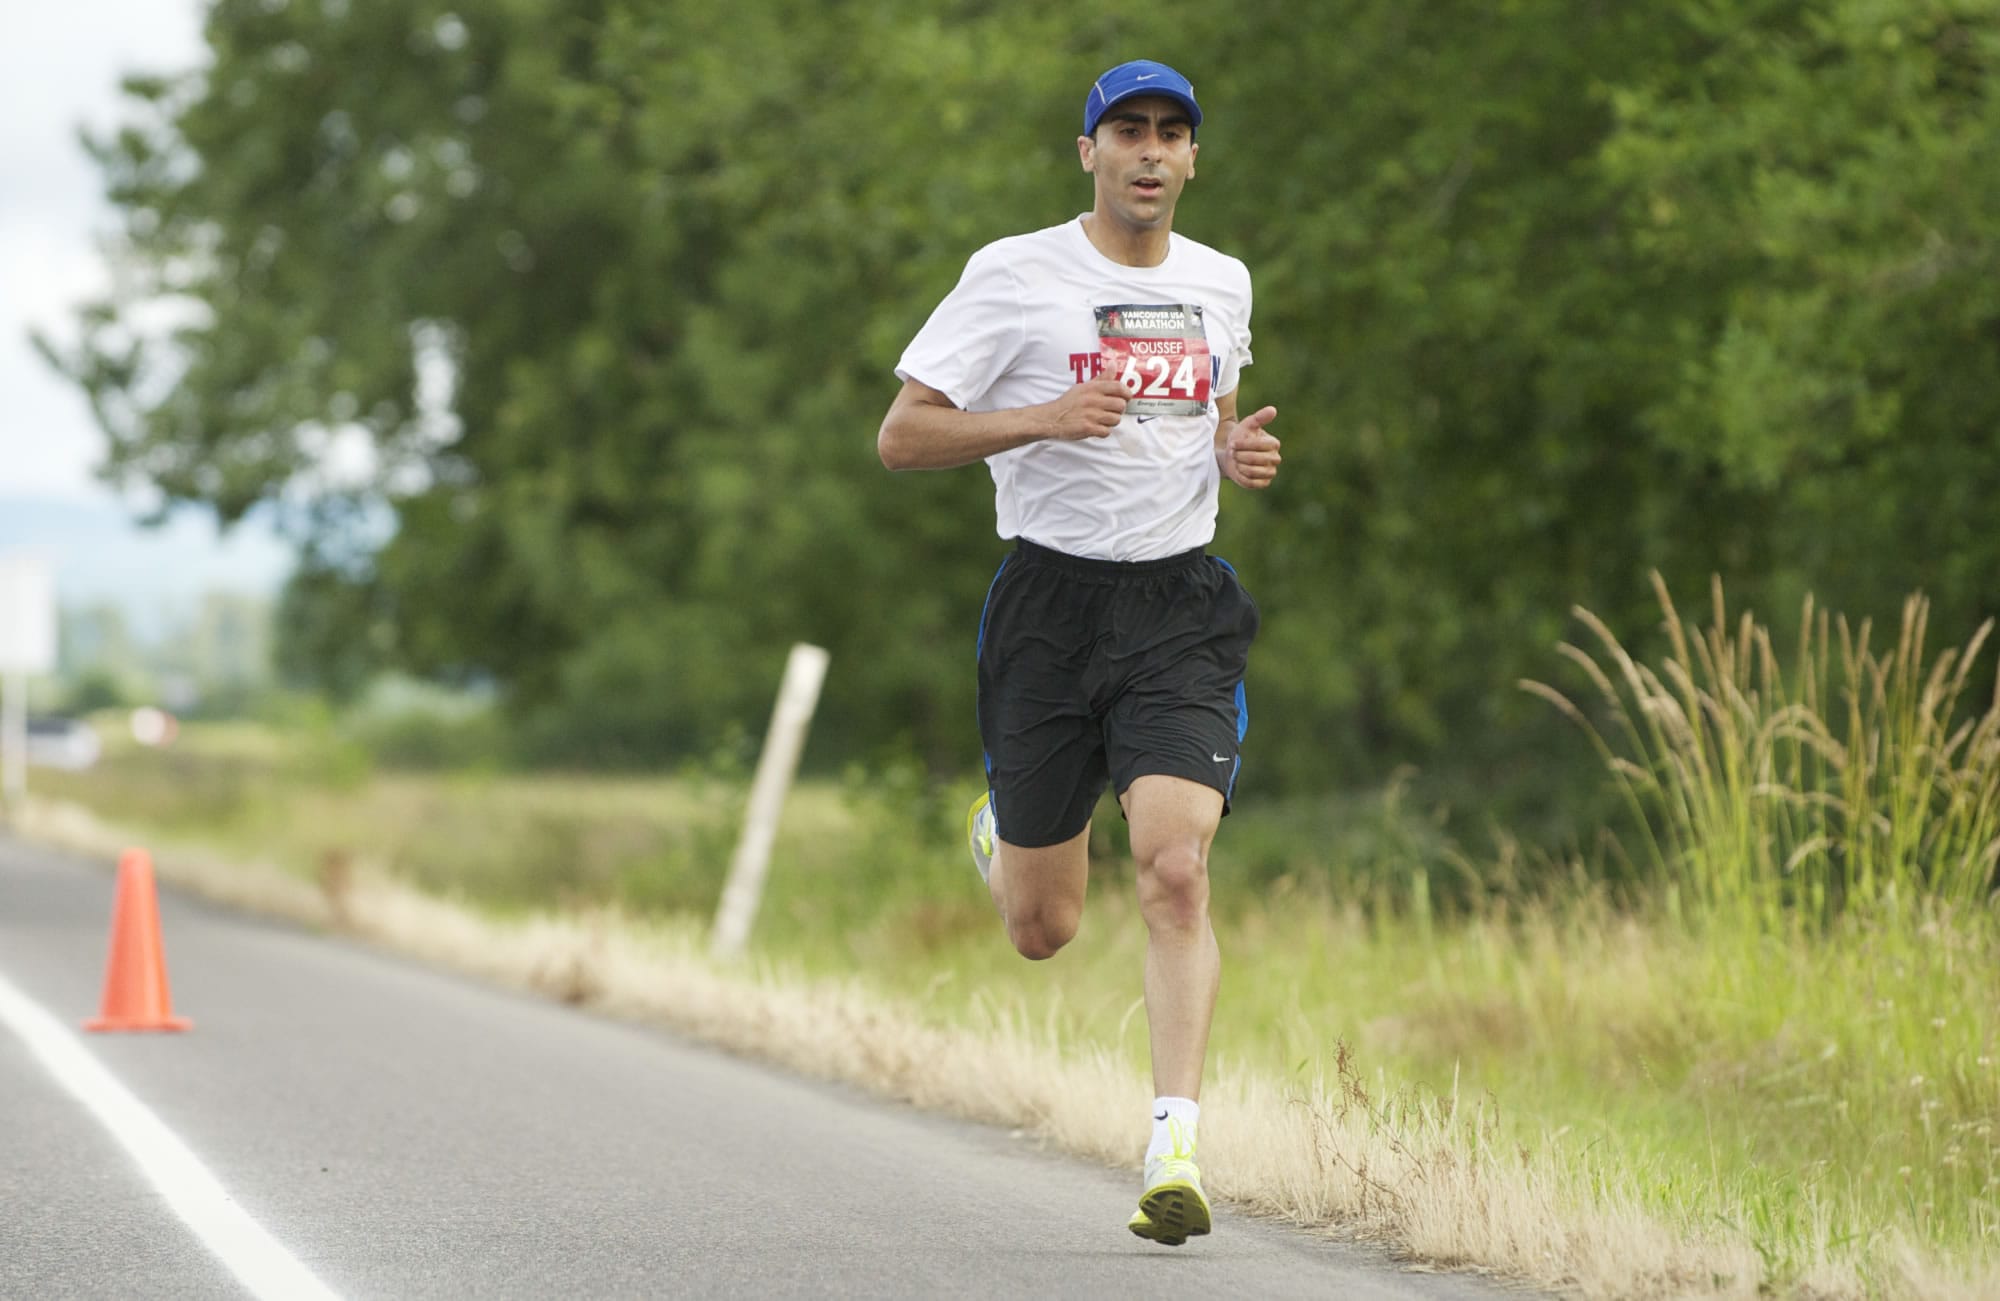 Youssef Zirari, 26, of Vancouver leading the Vancouver USA Marathon early in the race.